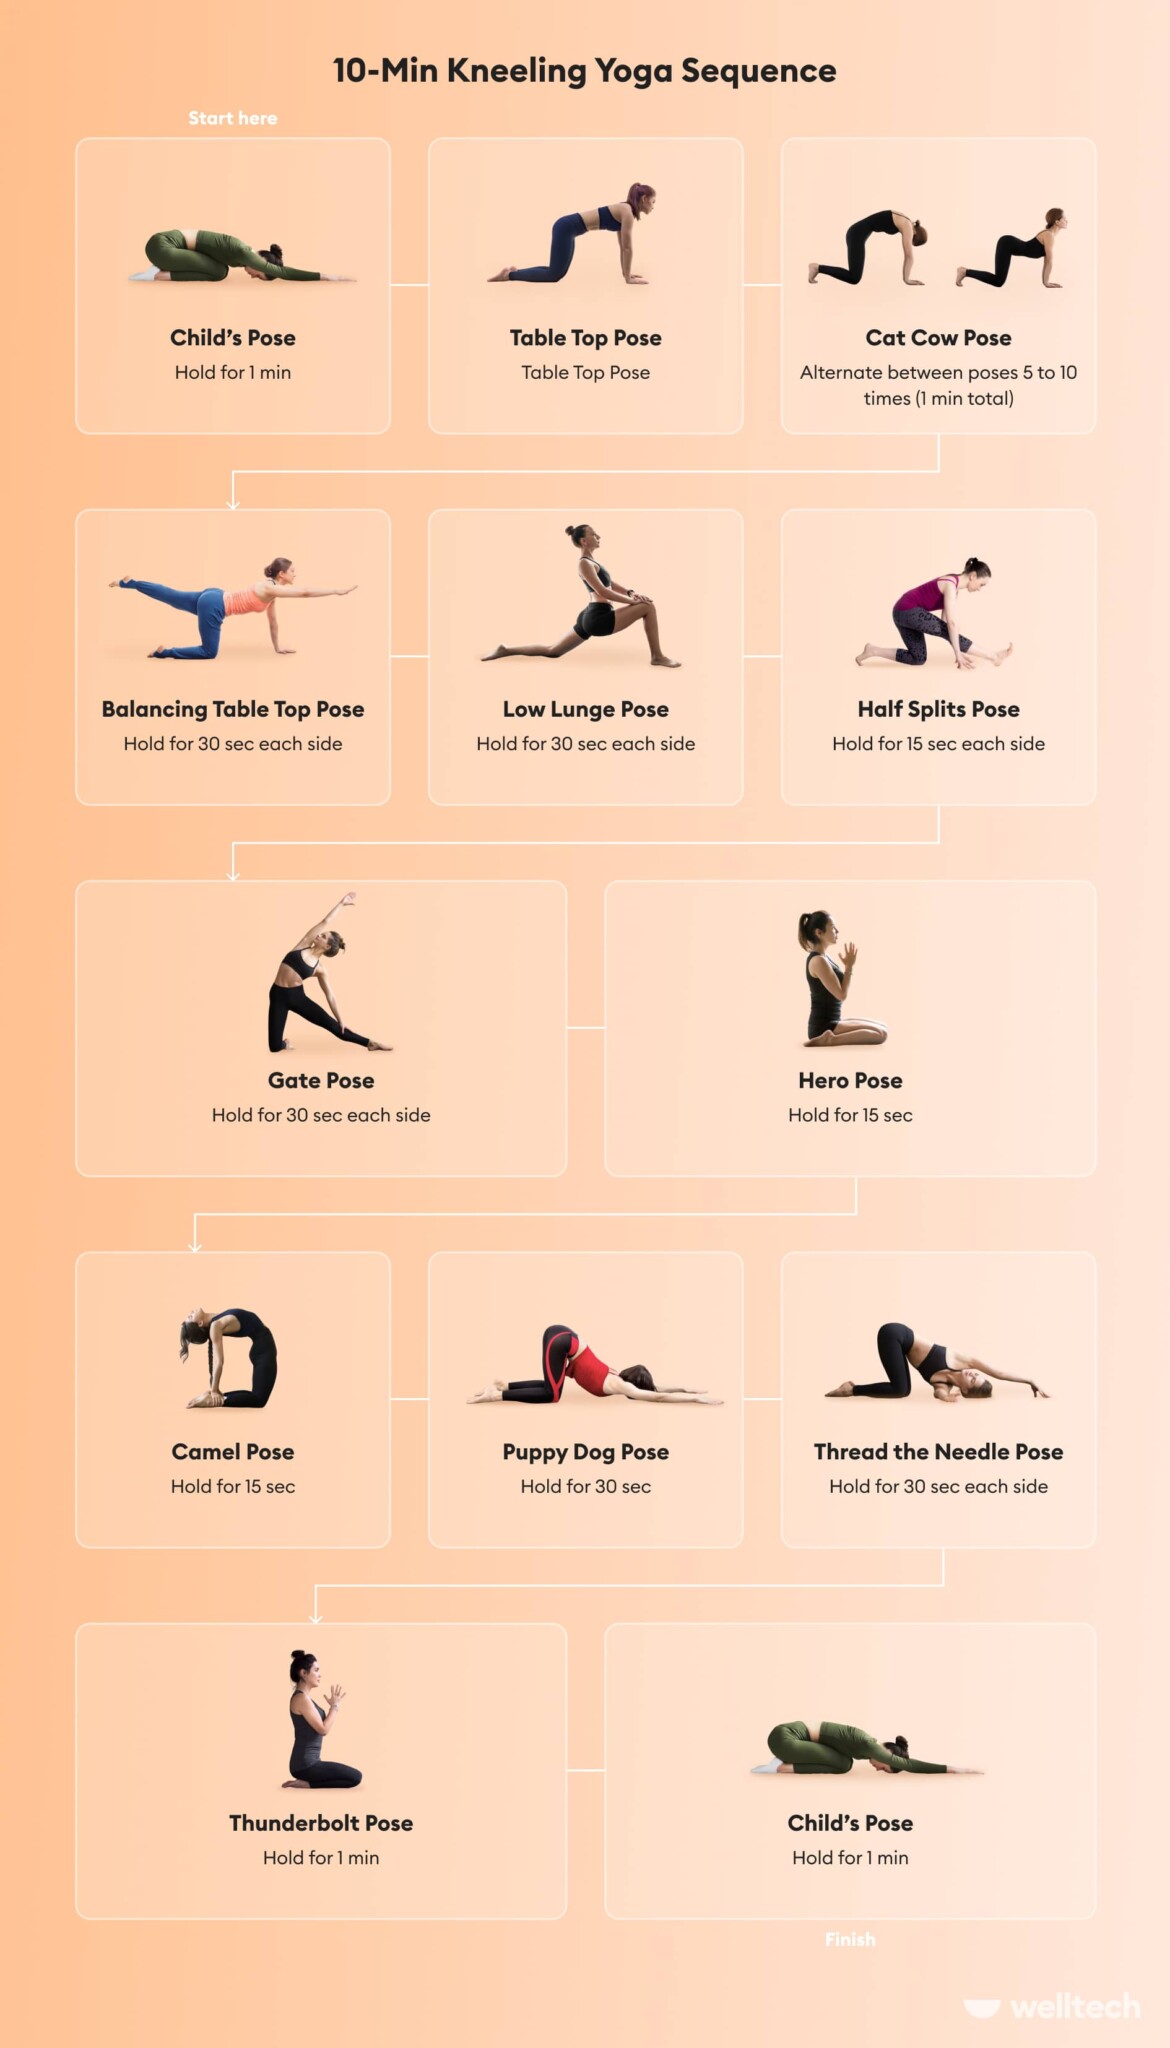 yoga kneeling sequence with 13 kneeling poses